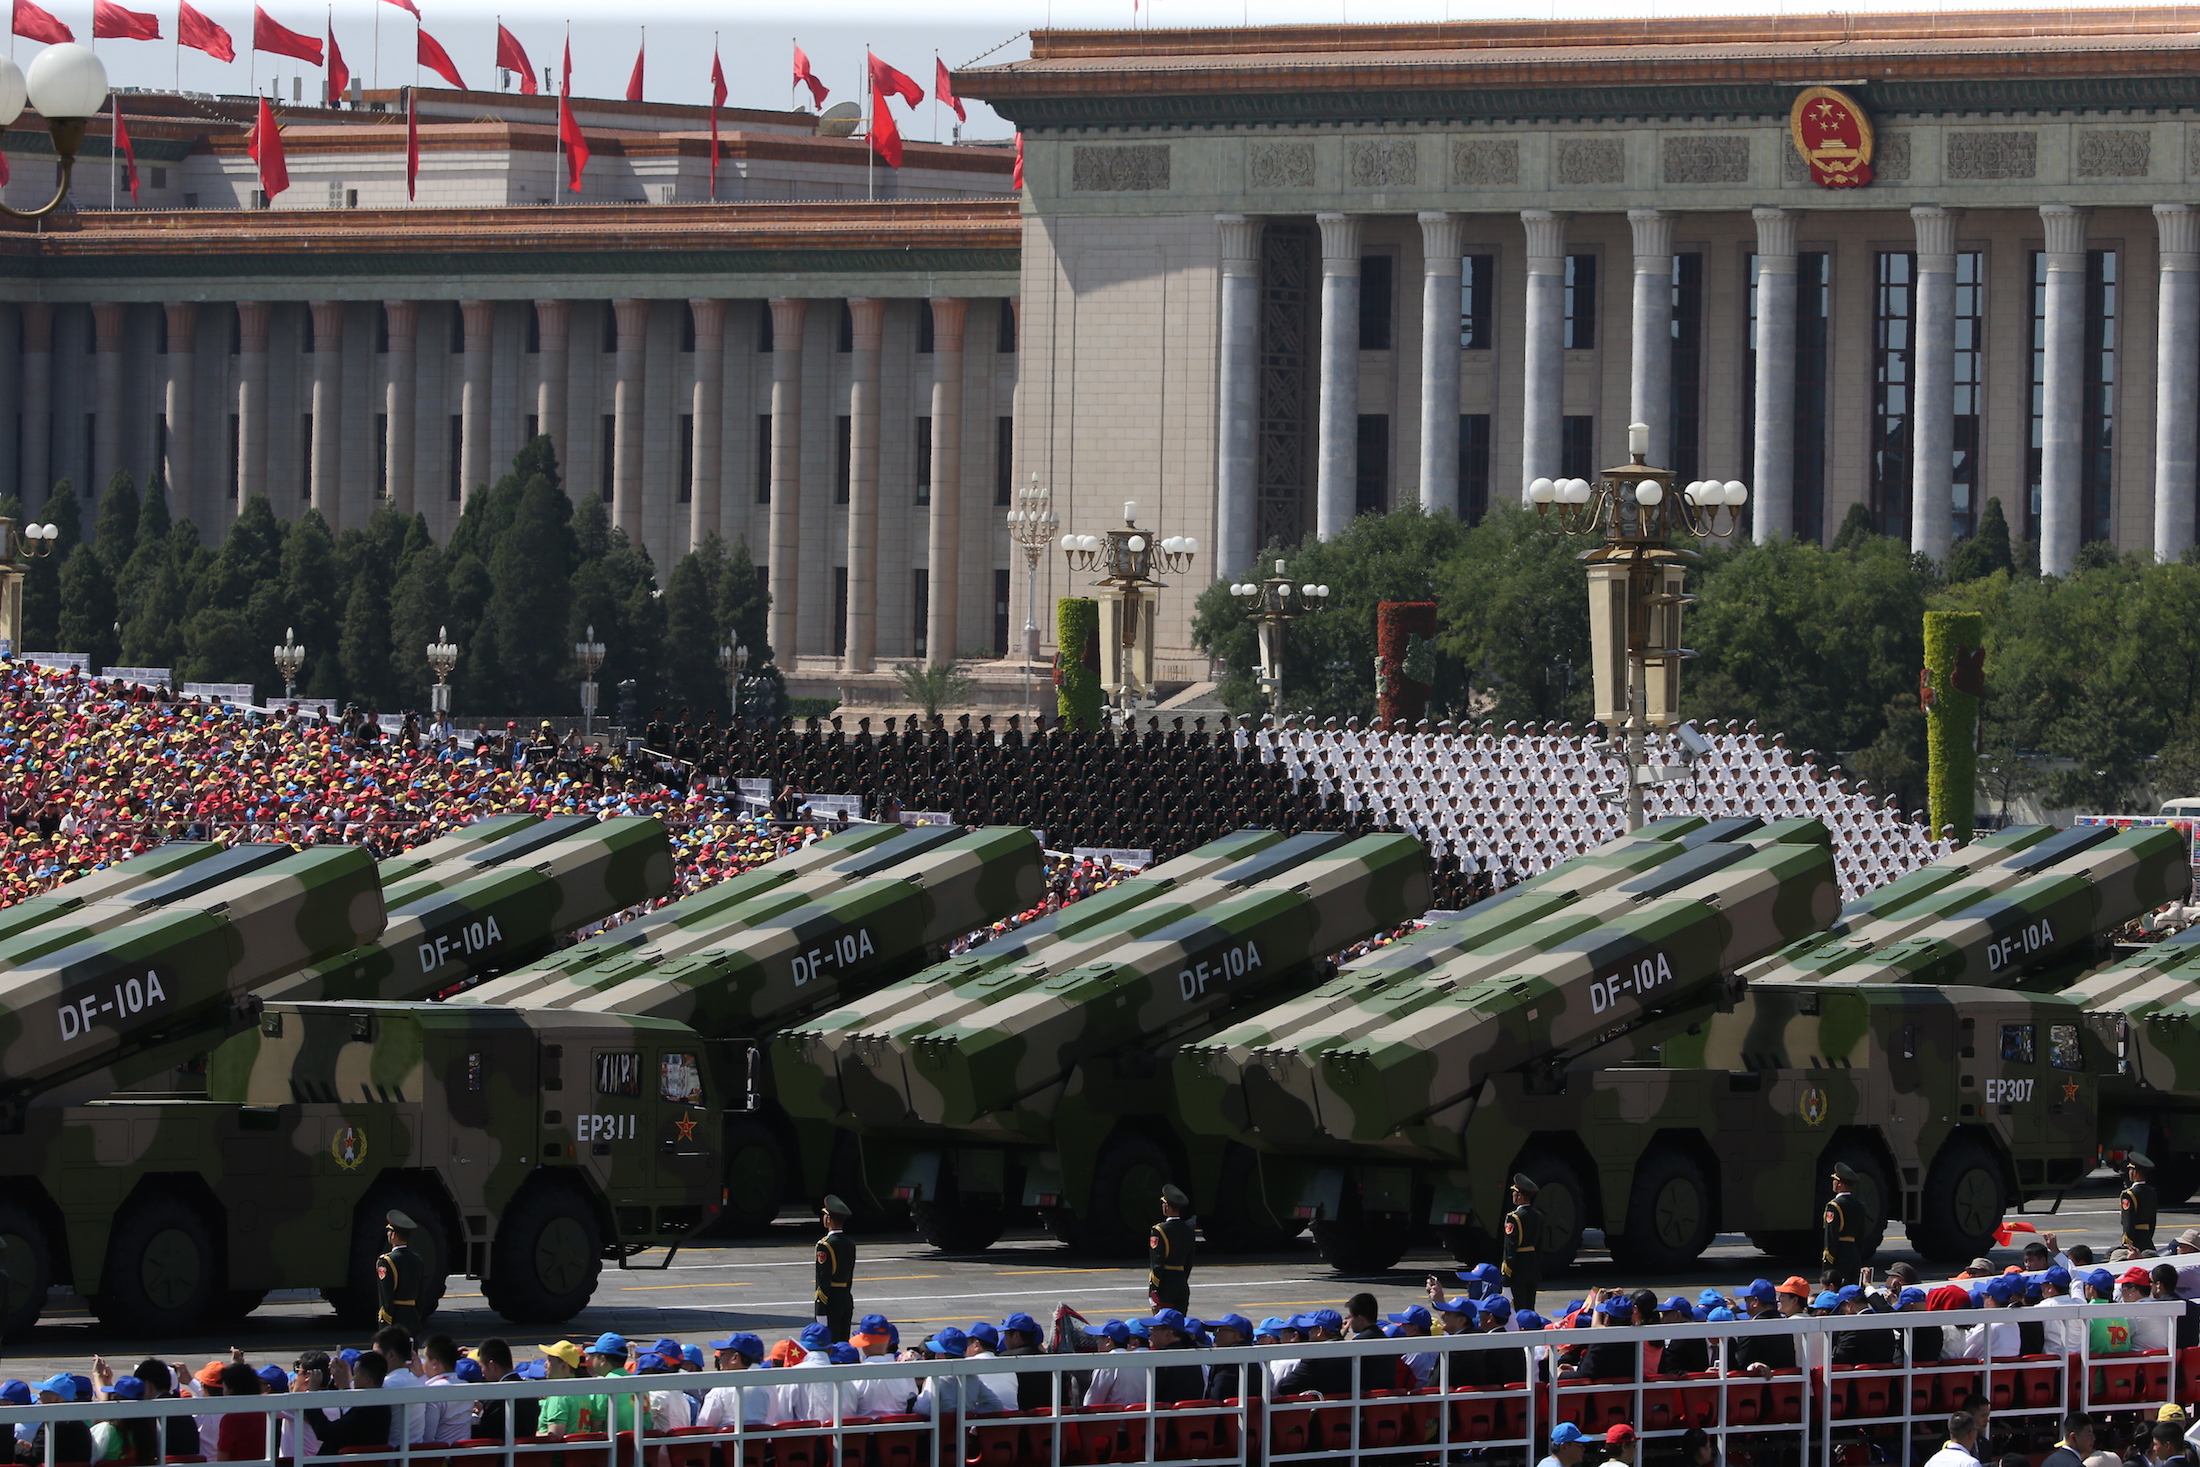 Photos Of China’s Parade Commemorating WWII Shows Off Its Full Military Force